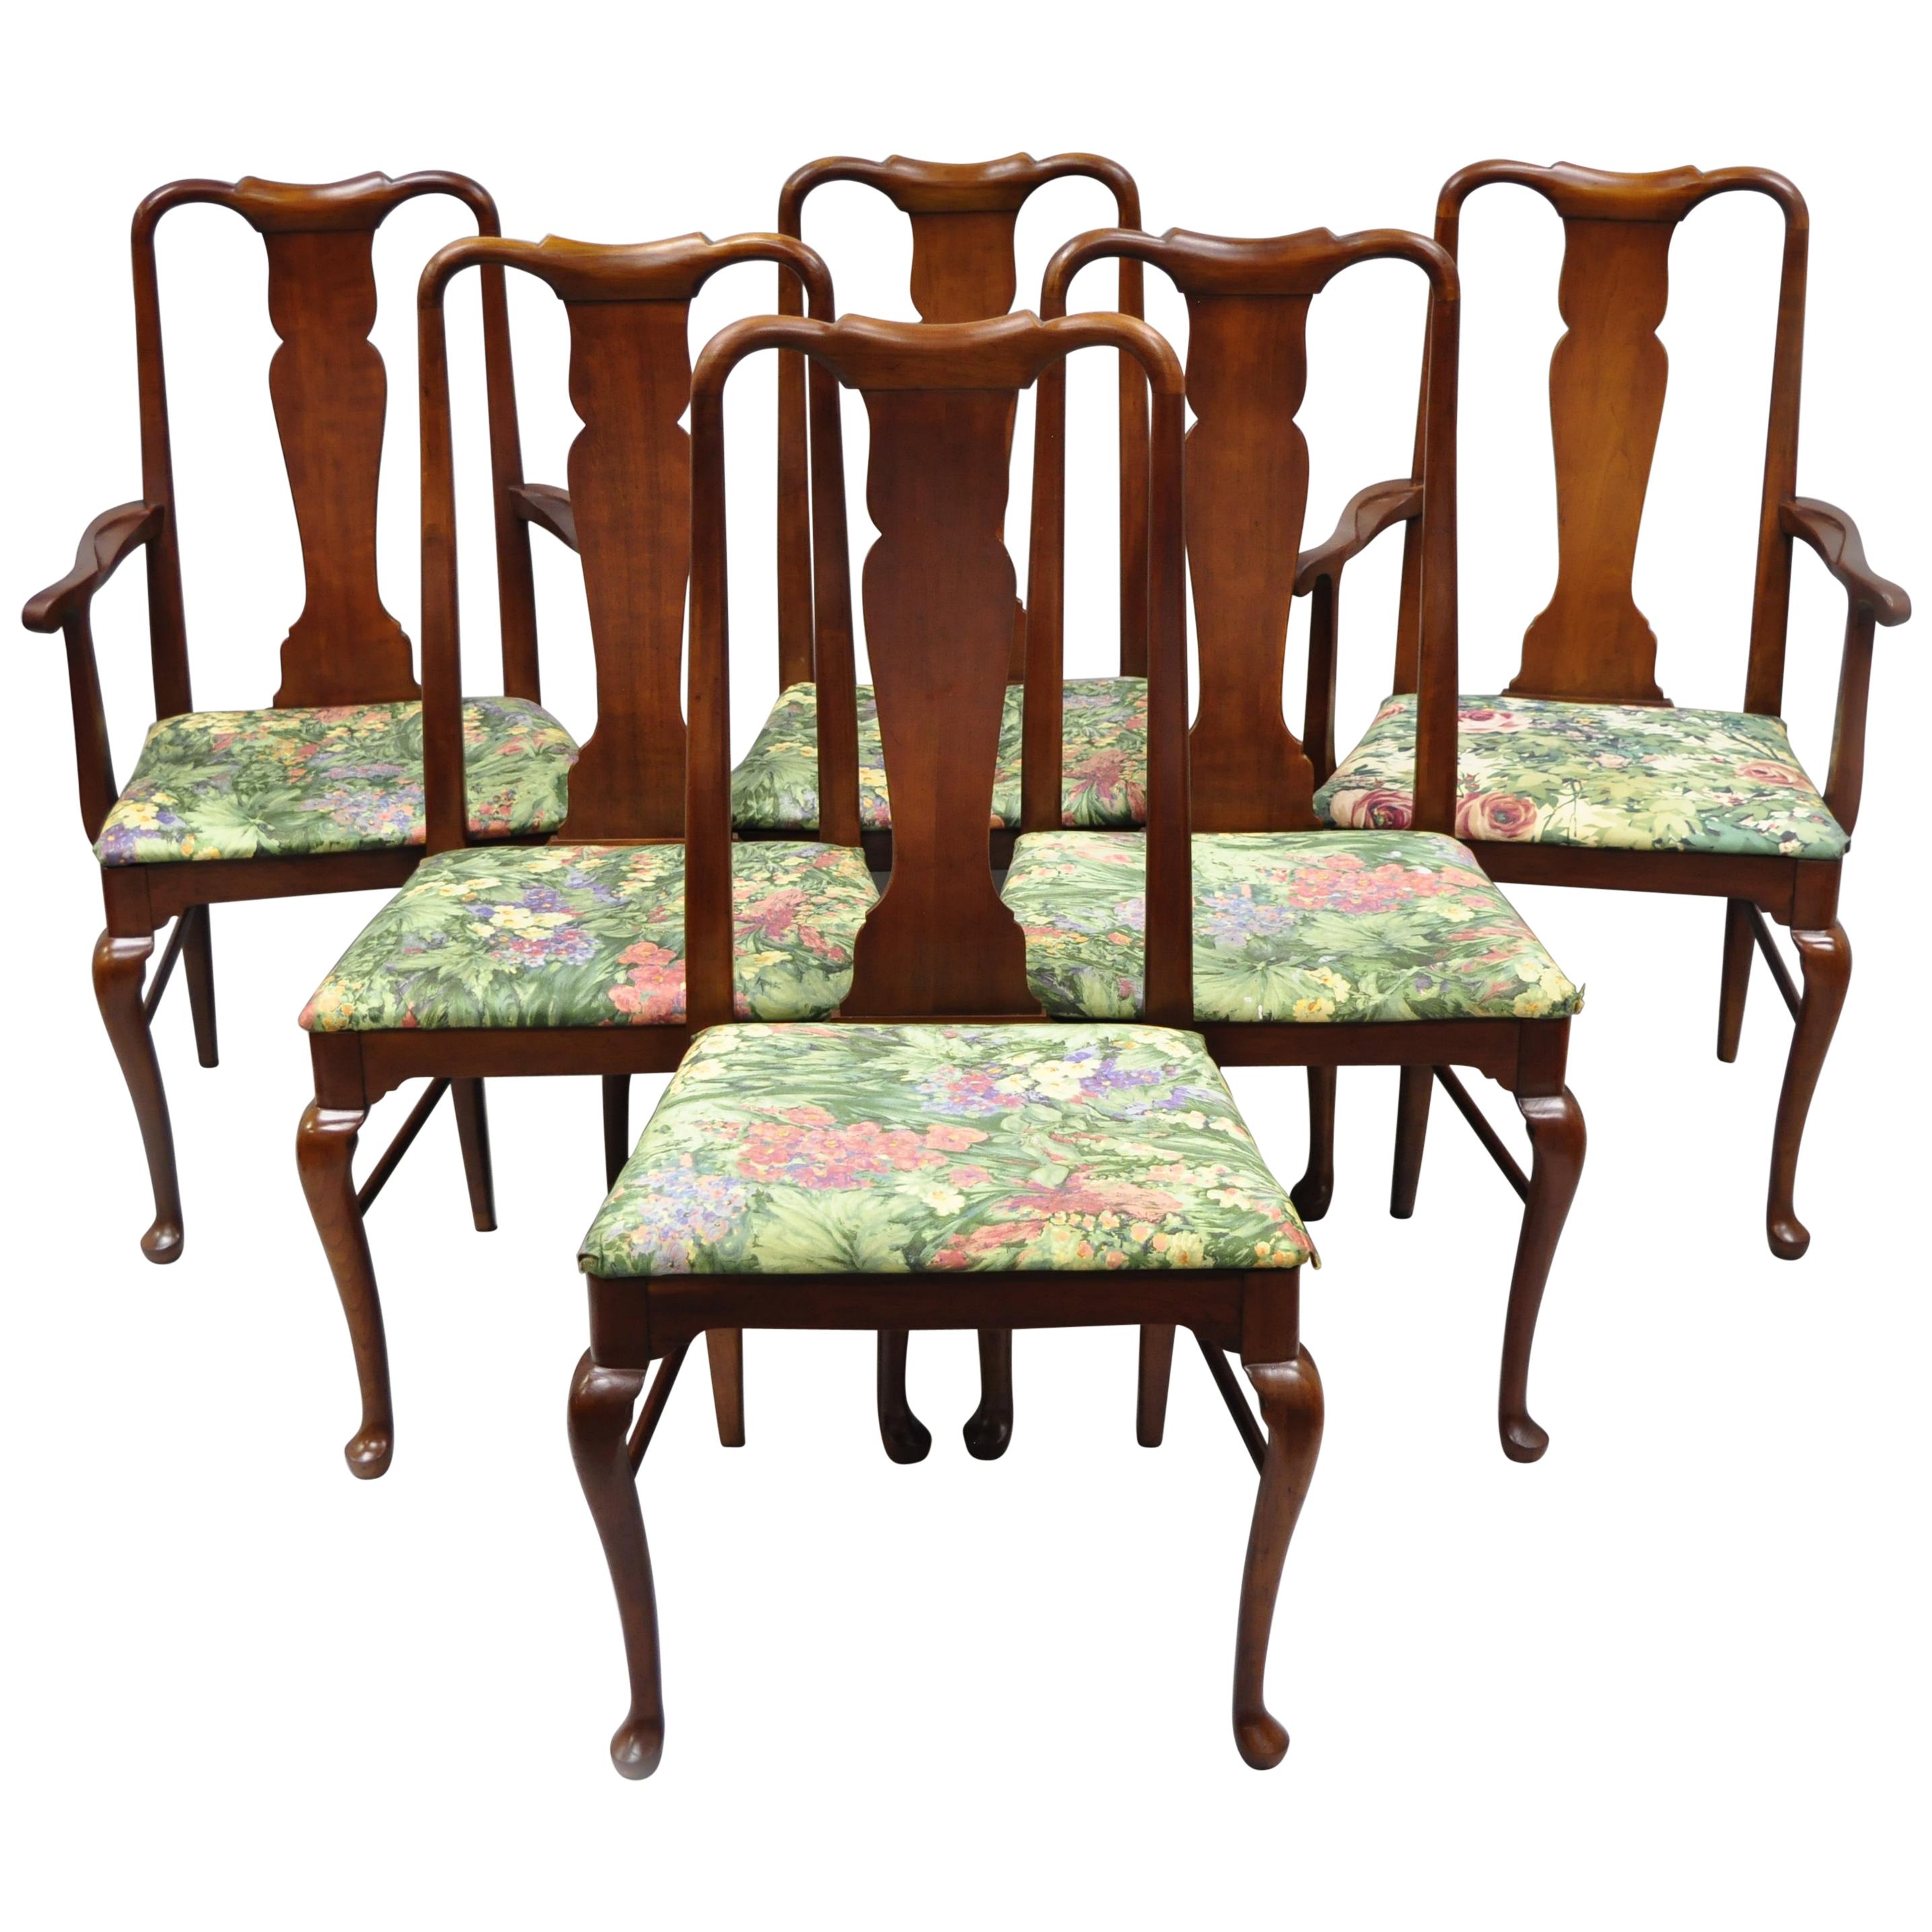 Tinkerbell reccomend Vintage thomasville chairs 1959